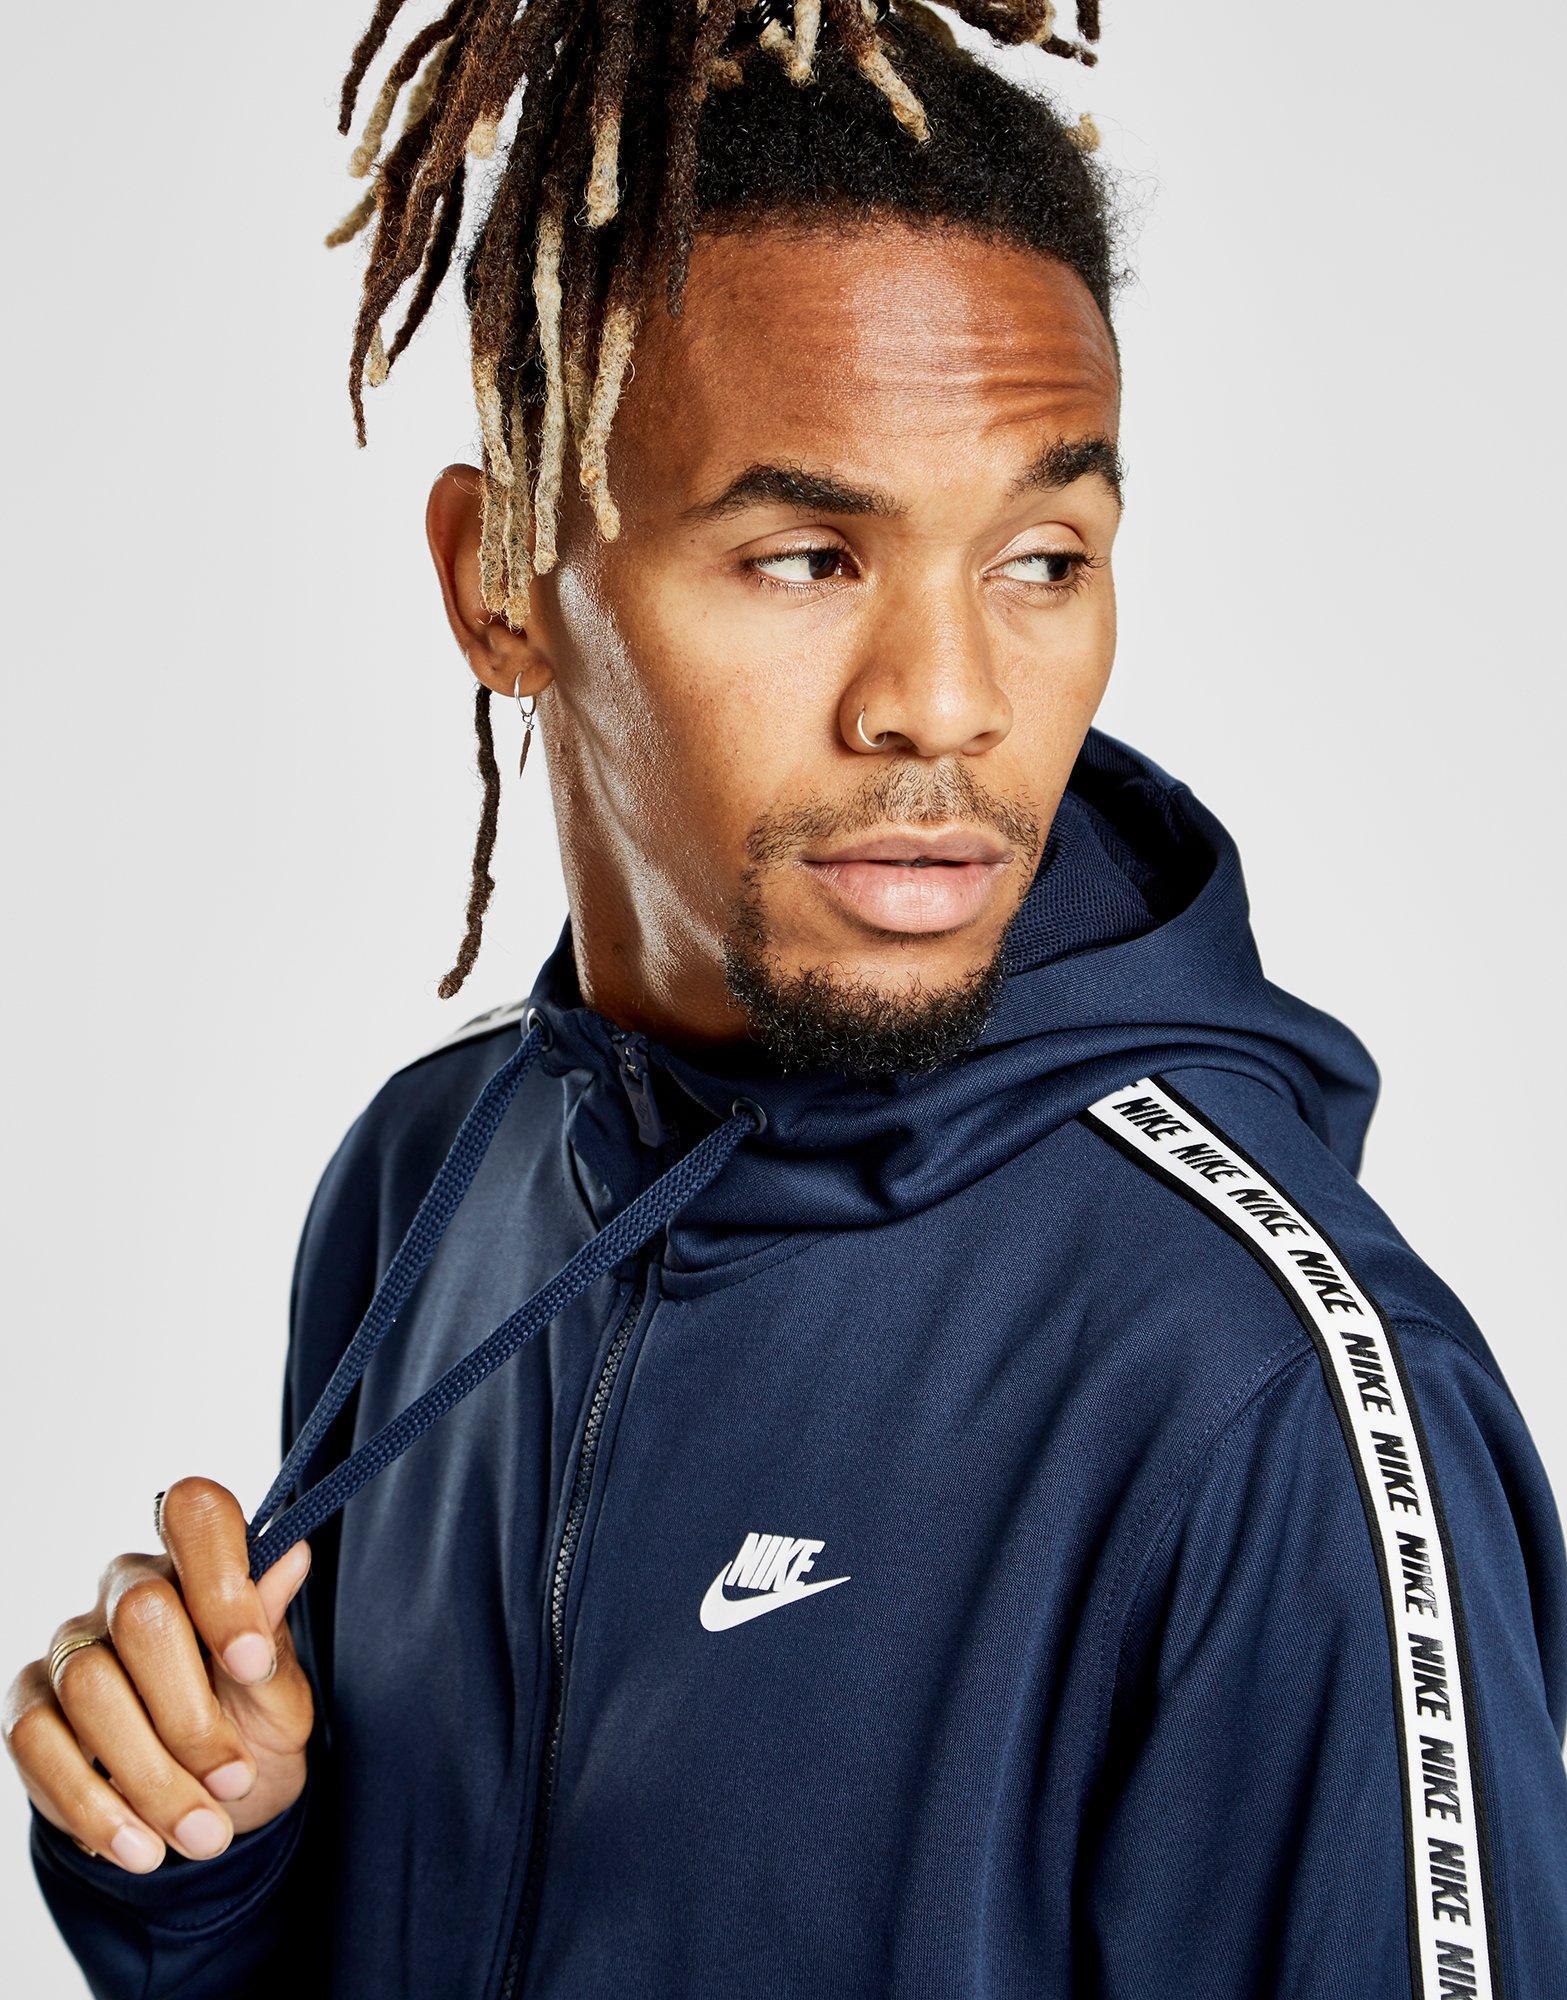 Nike Synthetic Repeat Tape Full Zip Hoodie in Navy/White (Blue) for Men -  Lyst